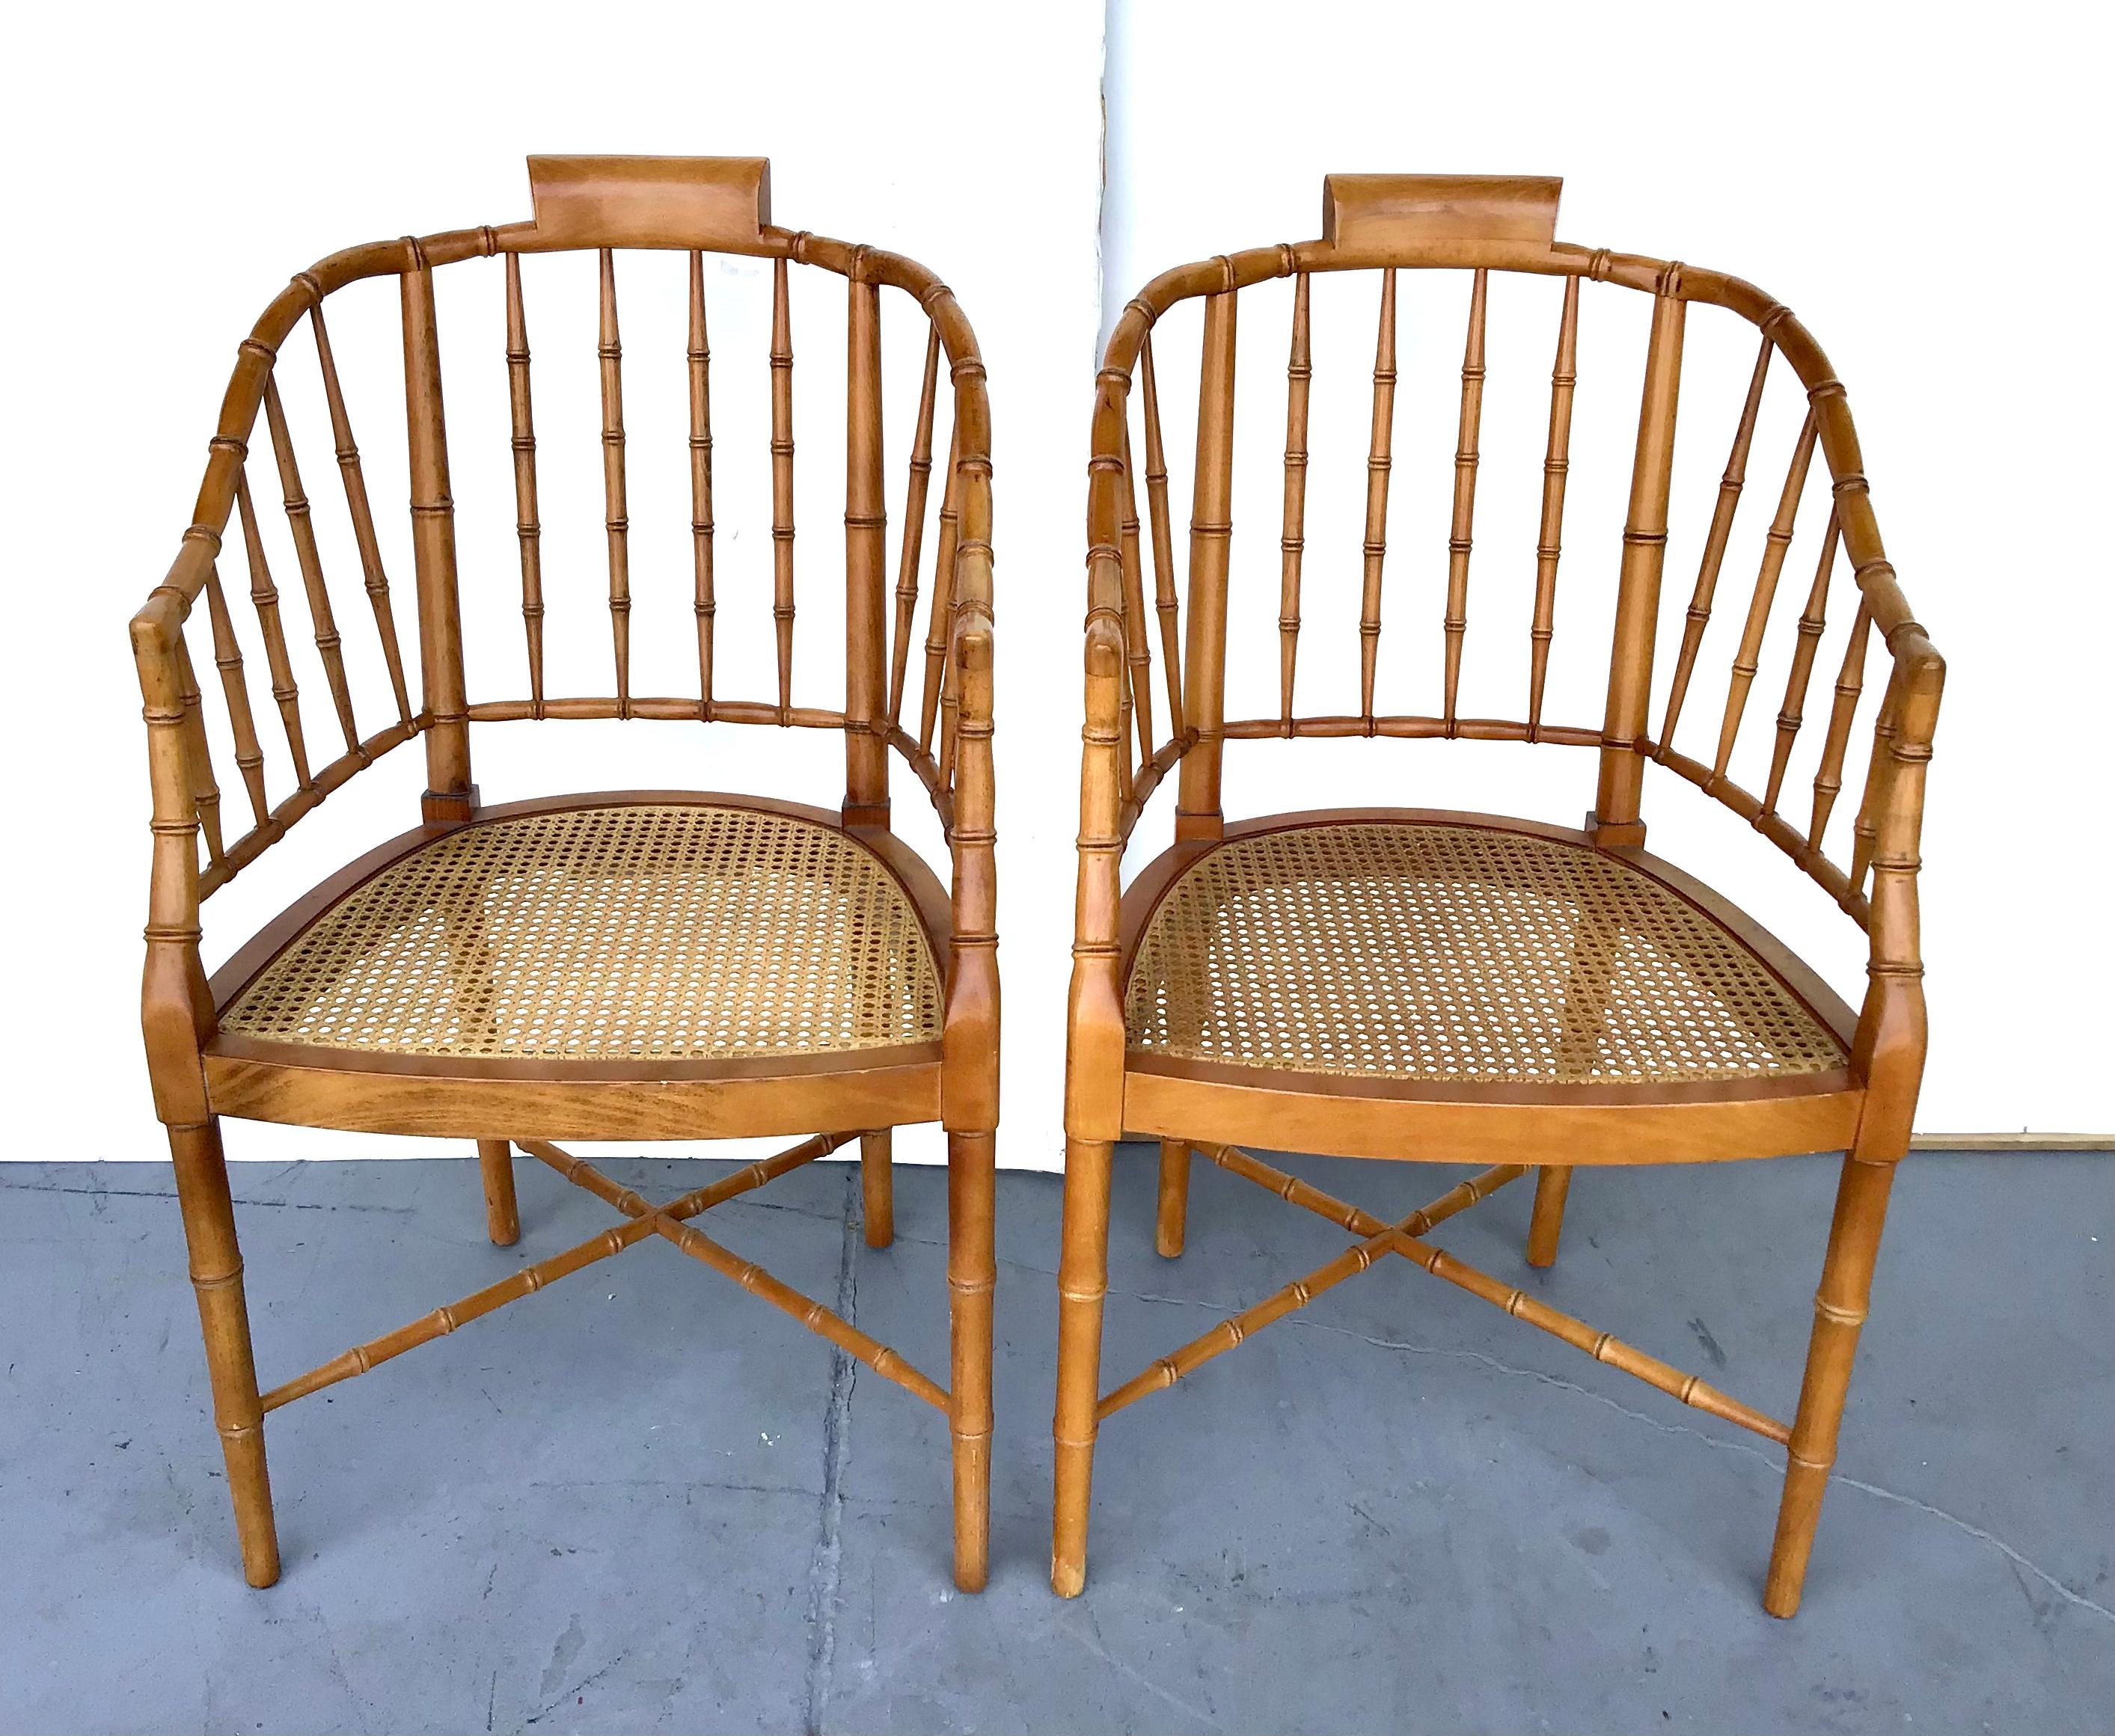 A pair of vintage Stickley Furniture faux-bamboo tub armchairs. Made of faux-bamboo, each of this pair of American chairs features a tub shaped back and curved arms resting on a cane seat. Each chair is raised on four slender legs, connected to one